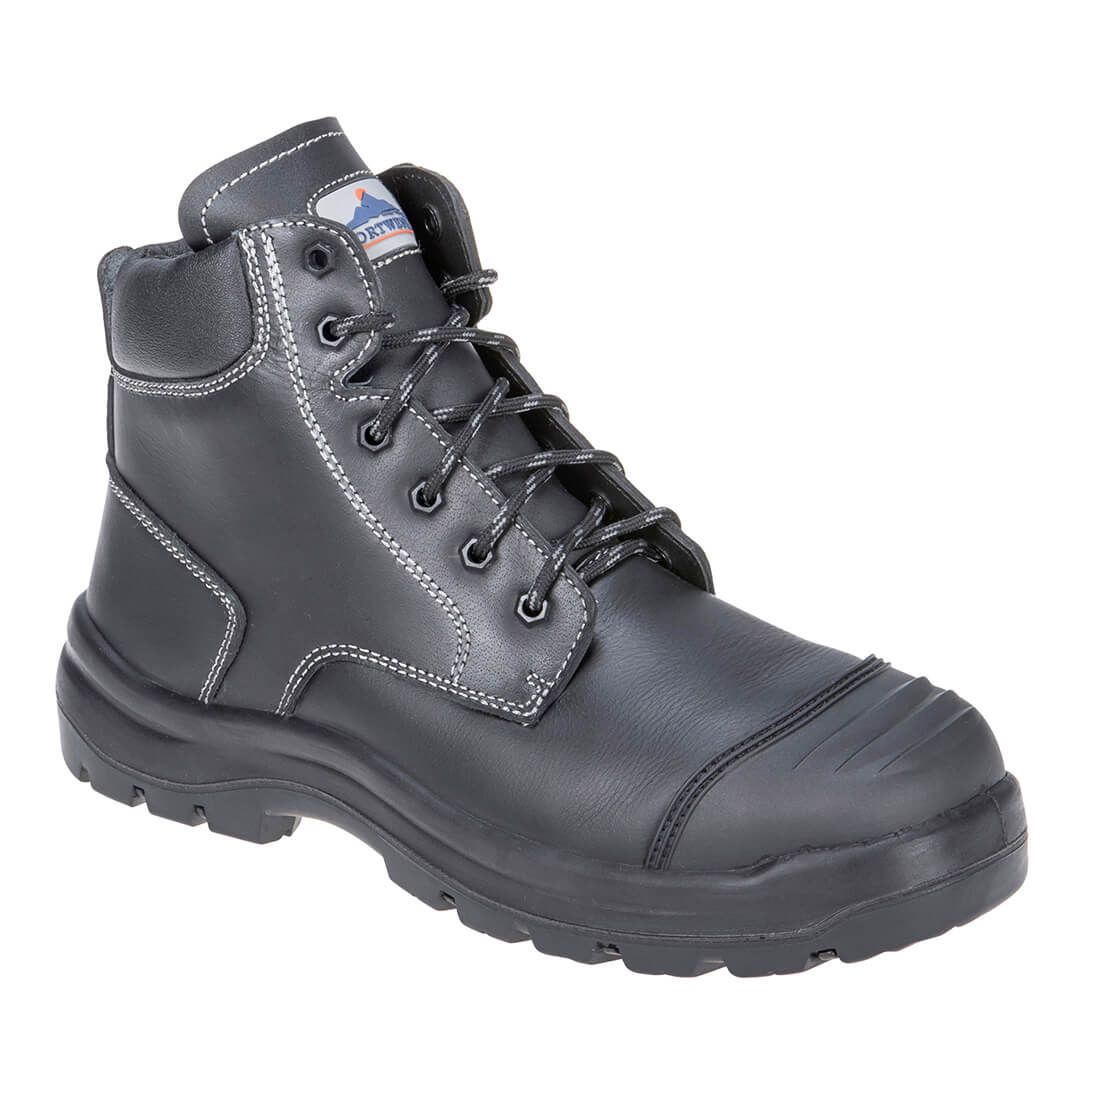 Image of Portwest Mens Clyde Safety Boots Black Size 10.5